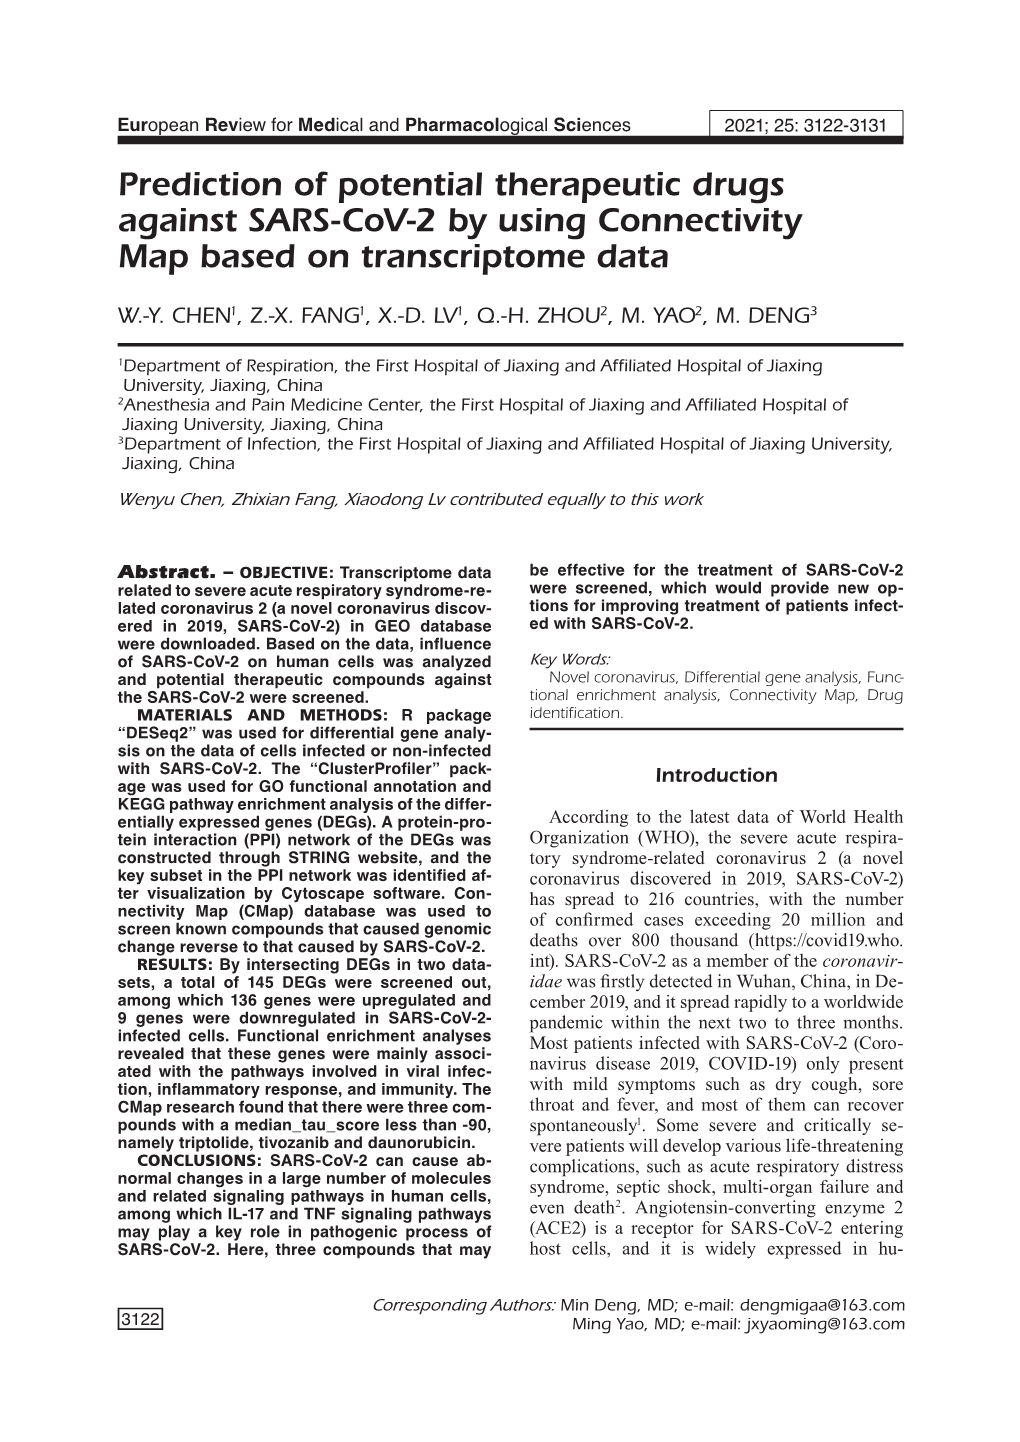 Prediction of Potential Therapeutic Drugs Against SARS-Cov-2 by Using Connectivity Map Based on Transcriptome Data